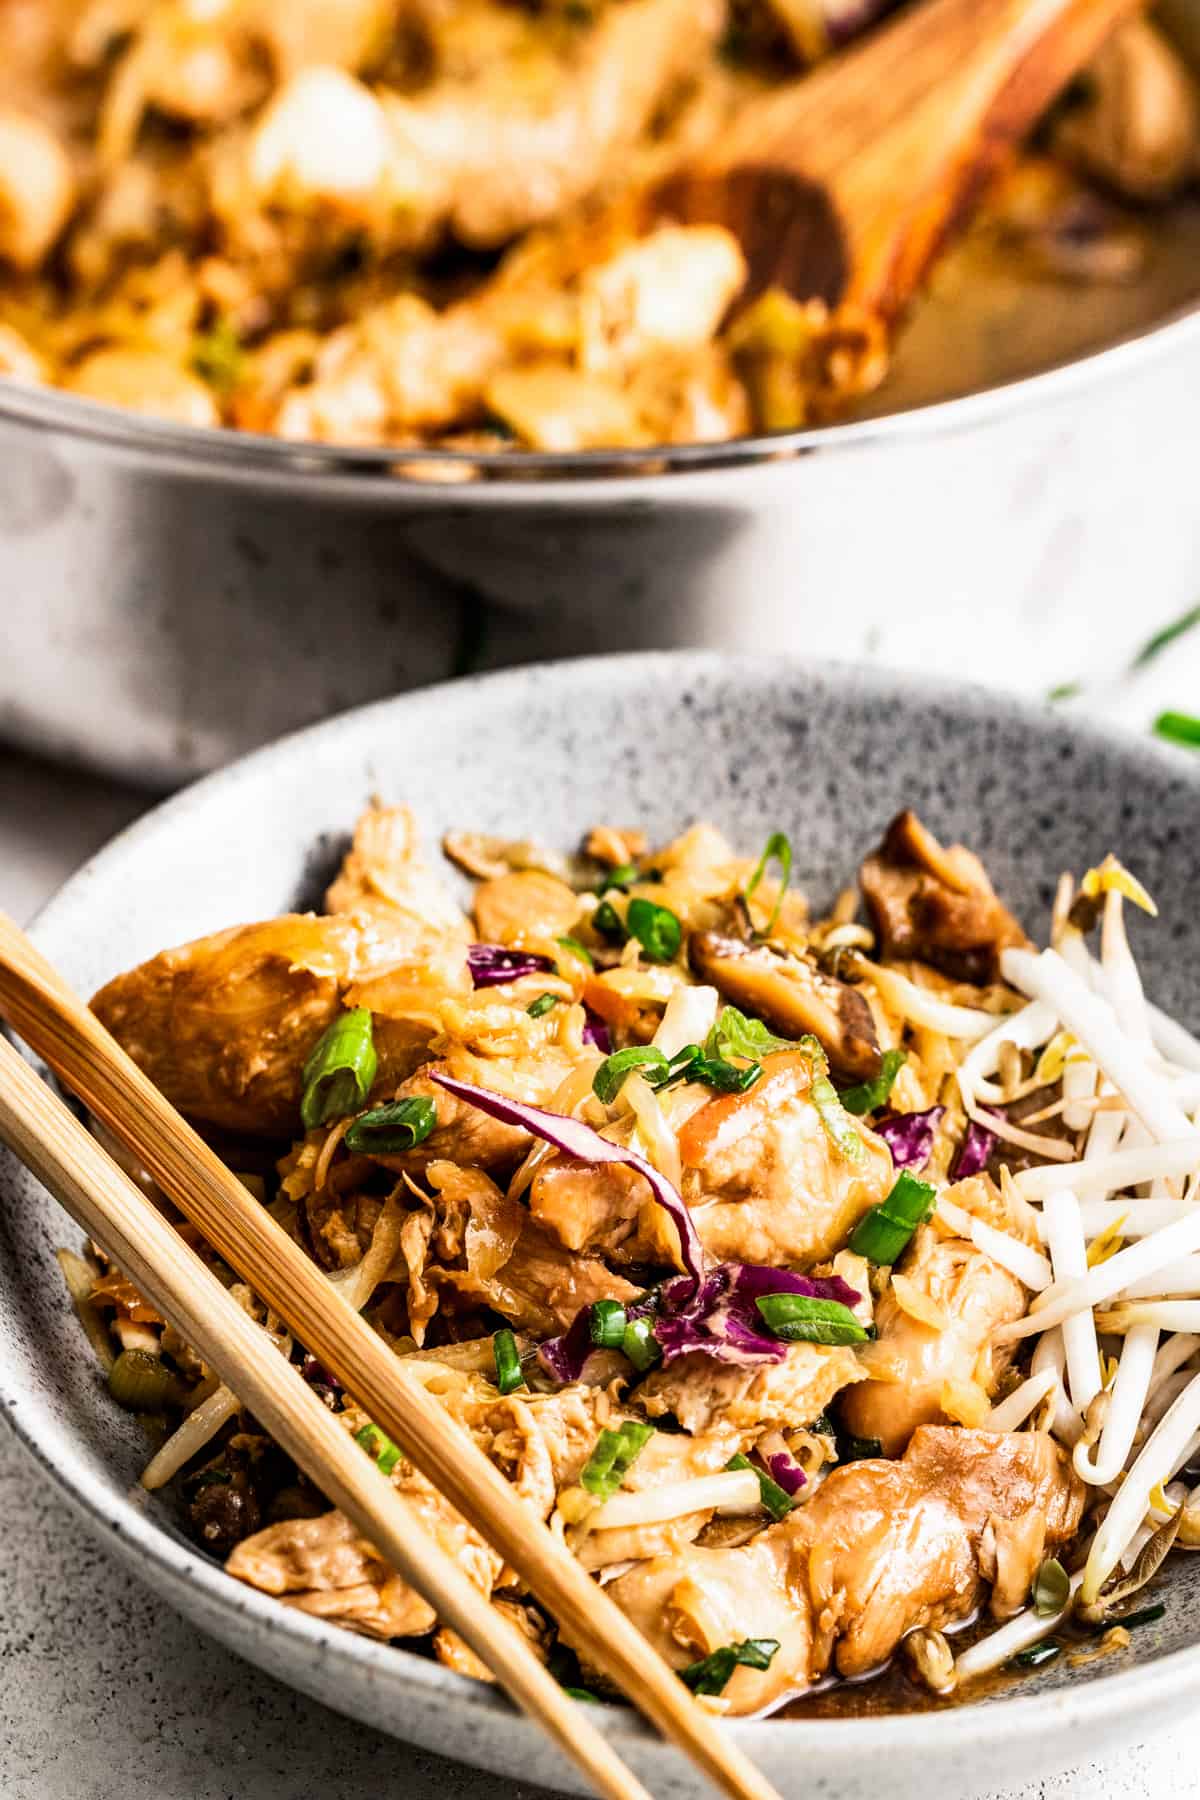 moo shu chicken served in a bowl, with a skillet of moo shu chicken placed right behind the bowl.